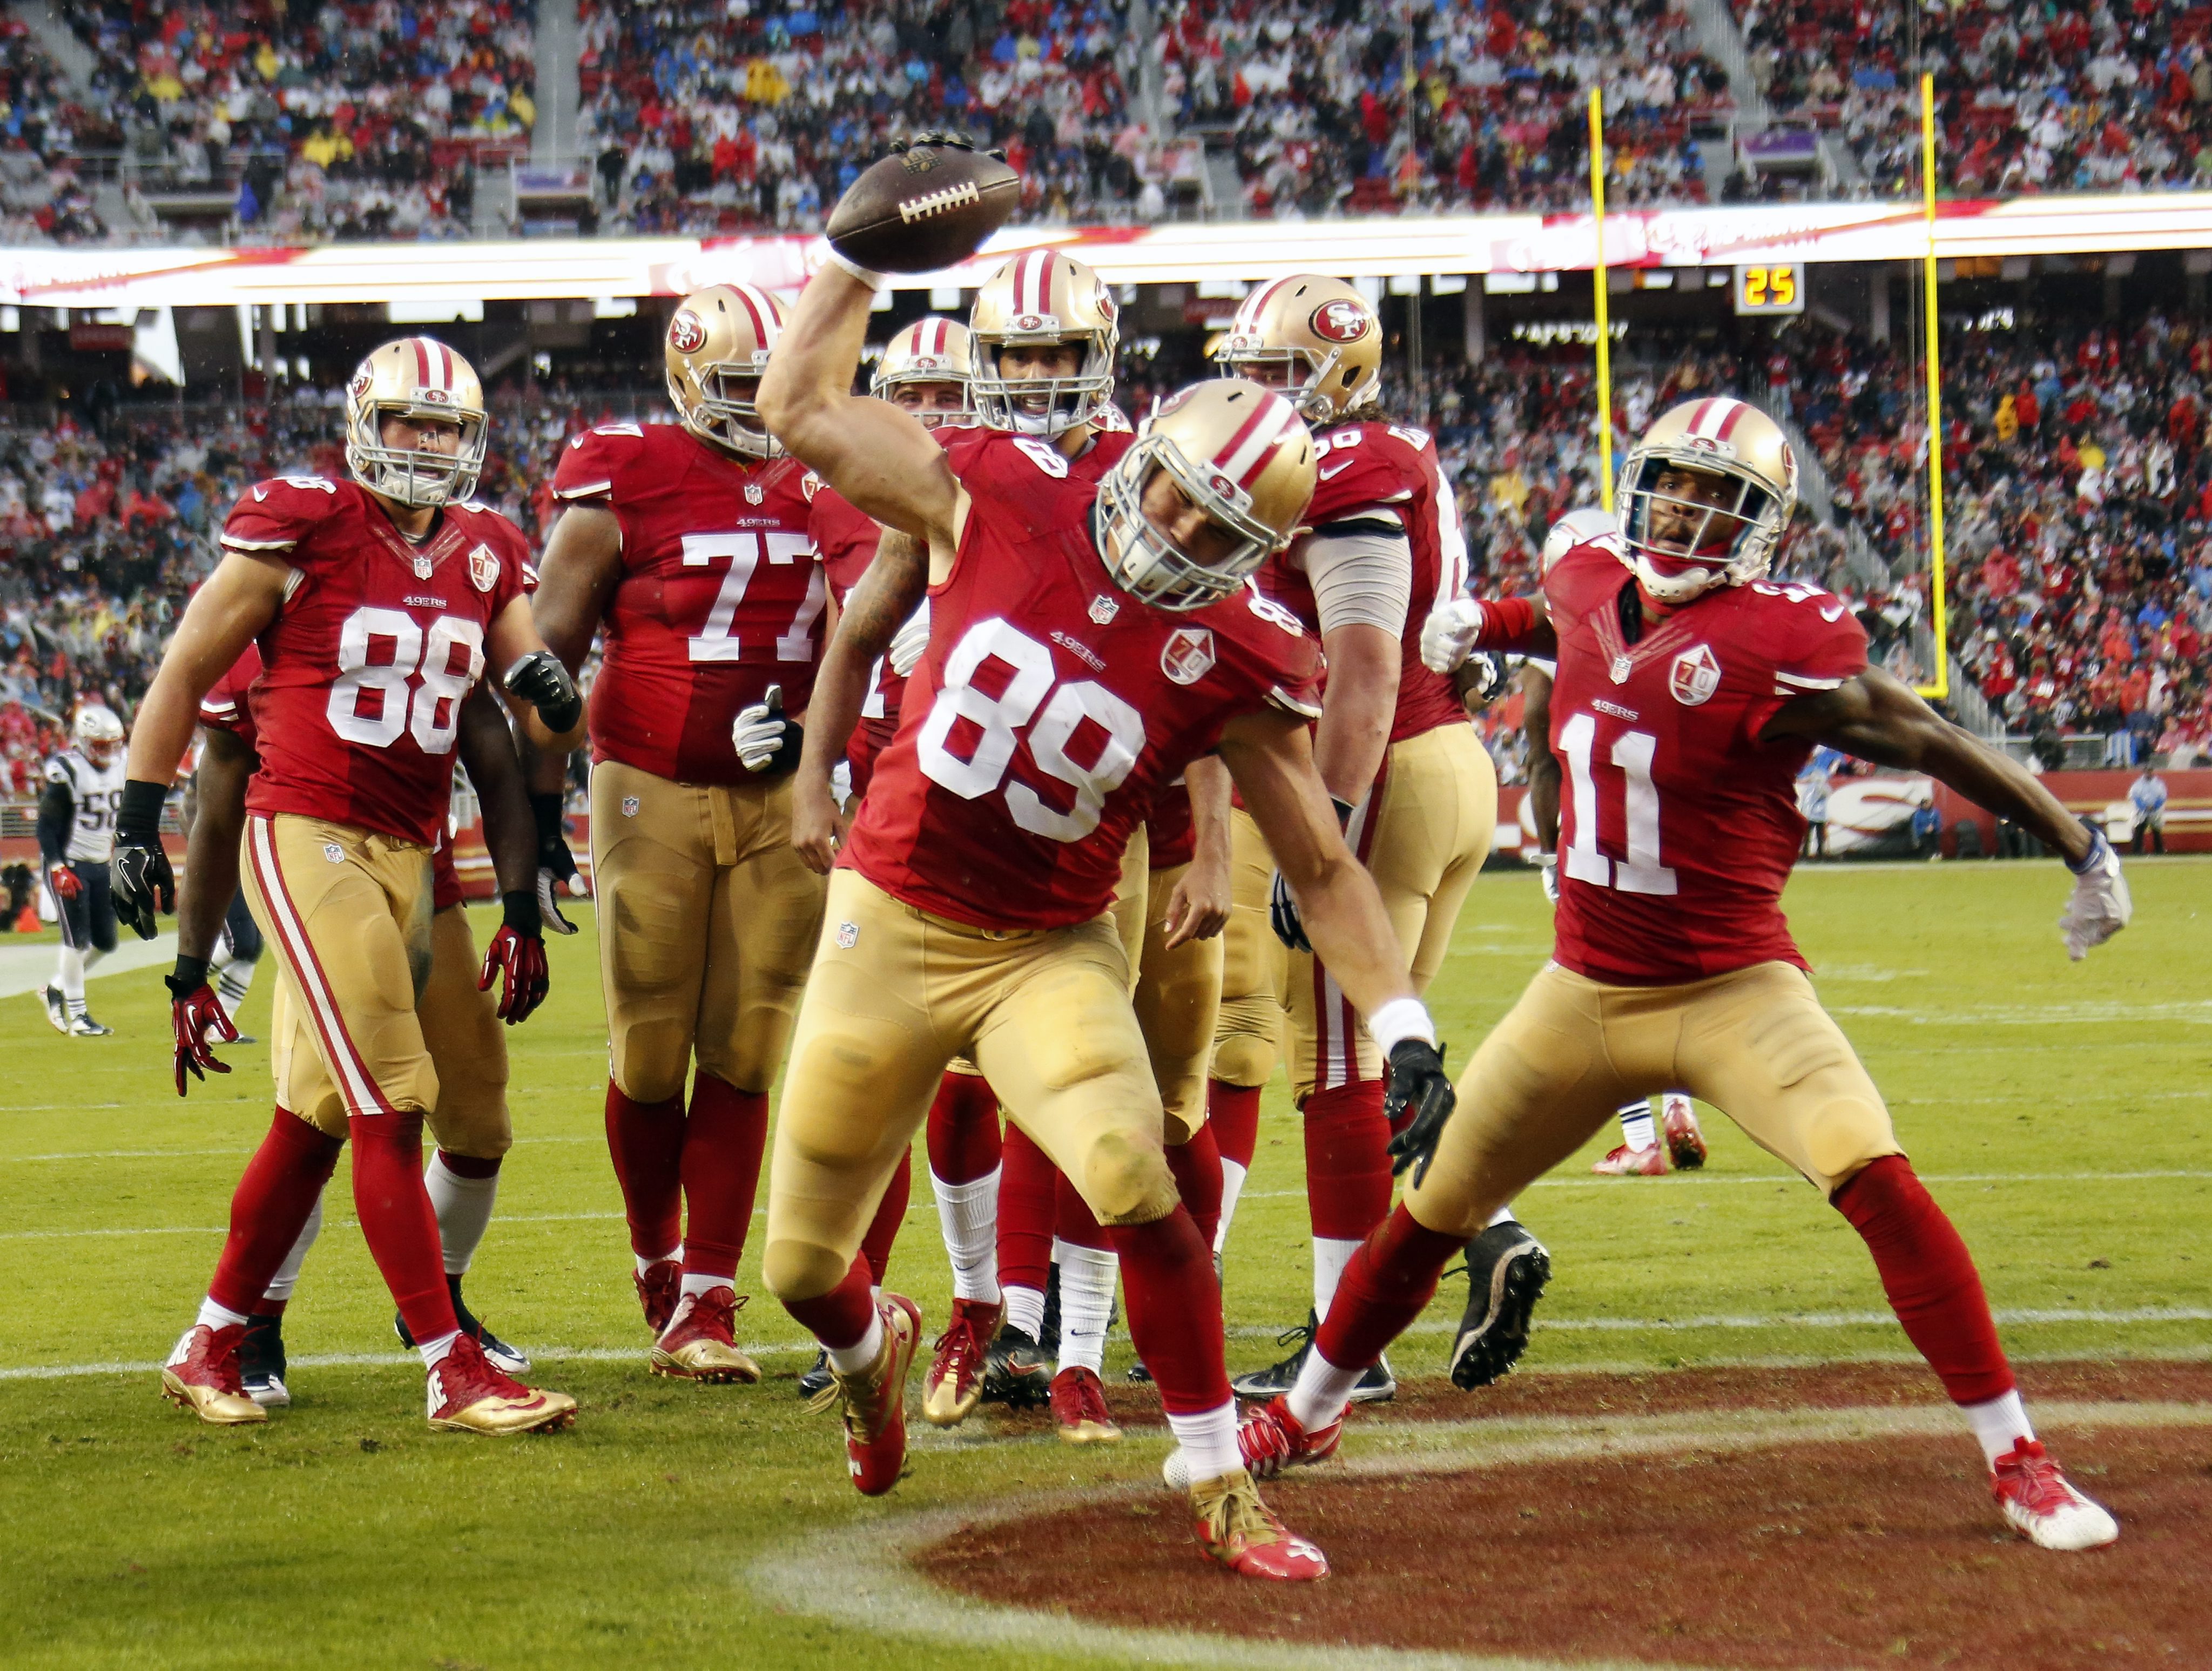 2016-11-21 17:22:30 epa05640376 San Francisco 49ers tight end Vance McDonald (C) spikes the ball in the end zone after scoring a touchdown against the New England Patriots during their NFL game at Levi's Stadium in Santa Clara, California, USA, 20 November 2016. EPA/JOHN G. MABANGLO